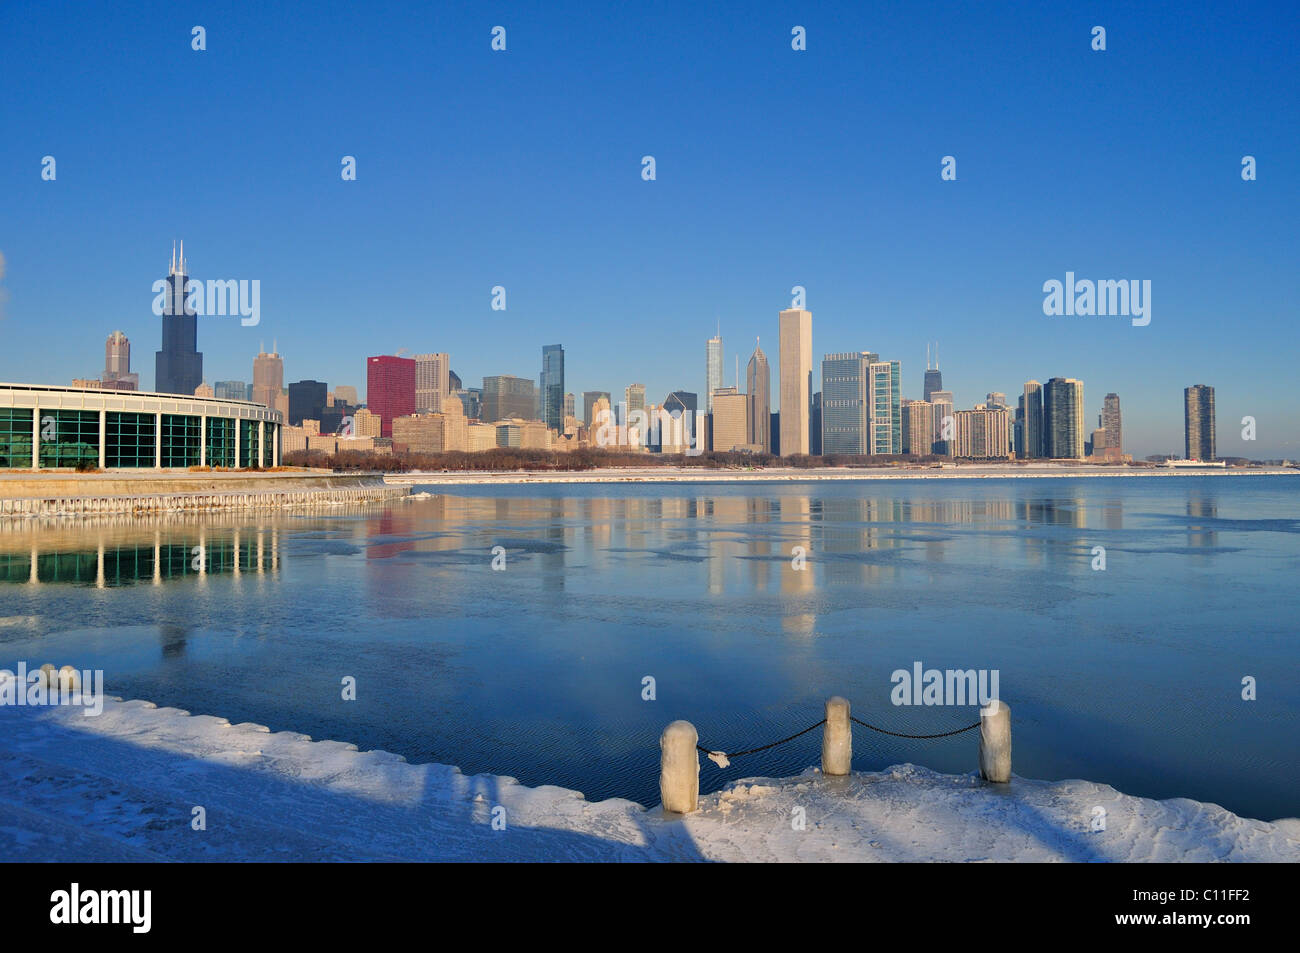 Ice forming in the lakefront harbors of Lake Michigan reflect the city skyline on a very cold December morning. Chicago, Illinois, USA. Stock Photo